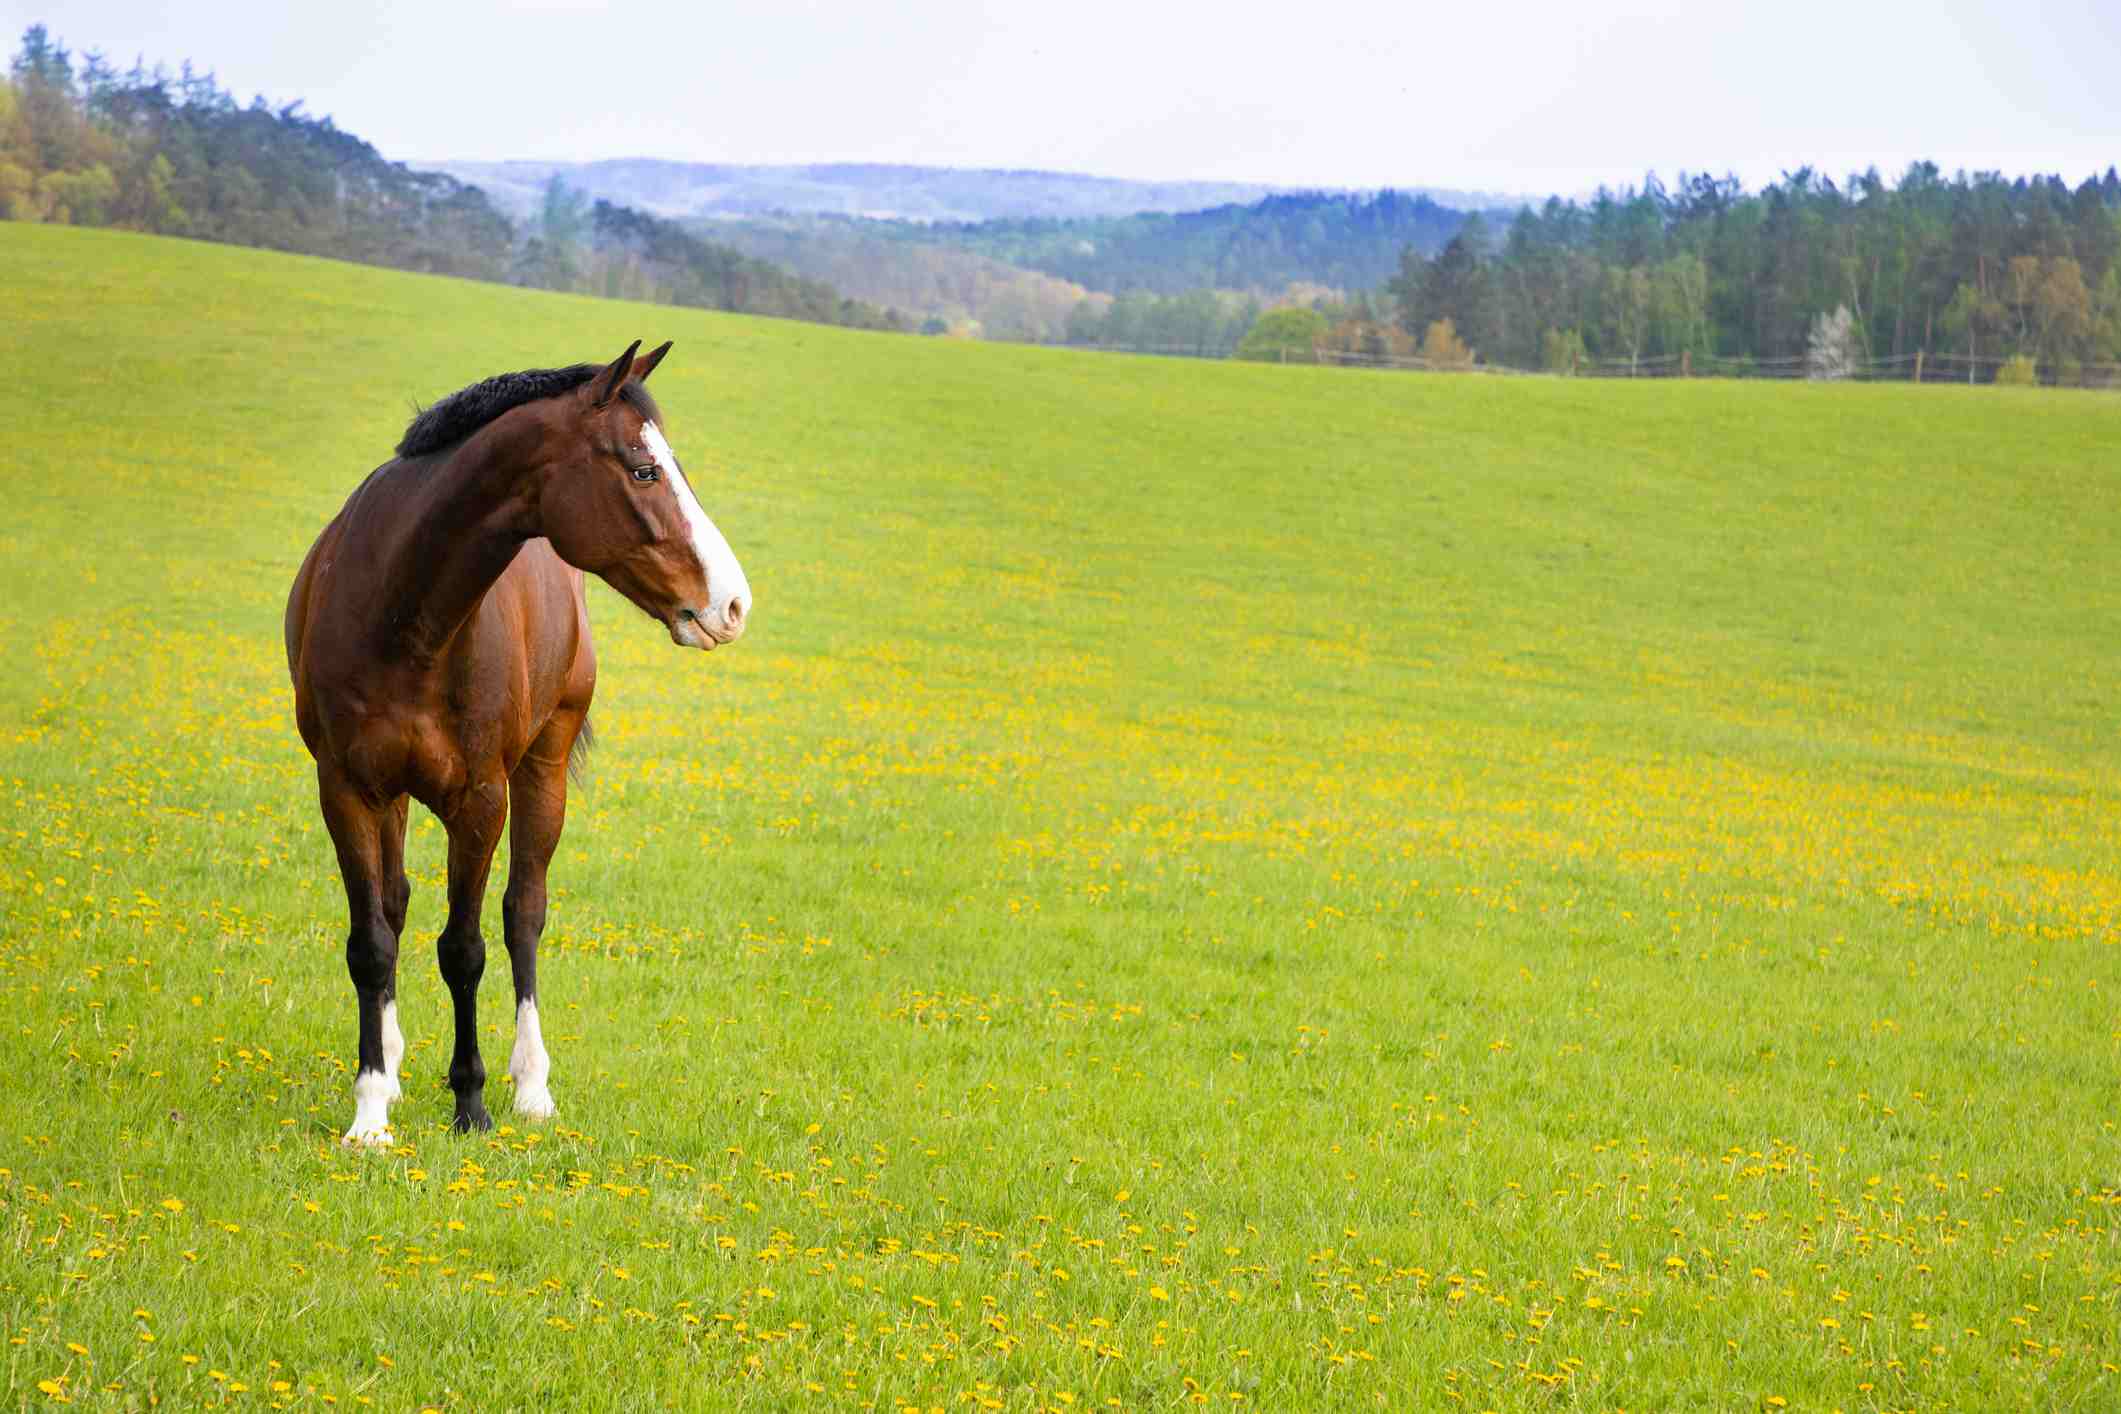 Horse looking lost on a field